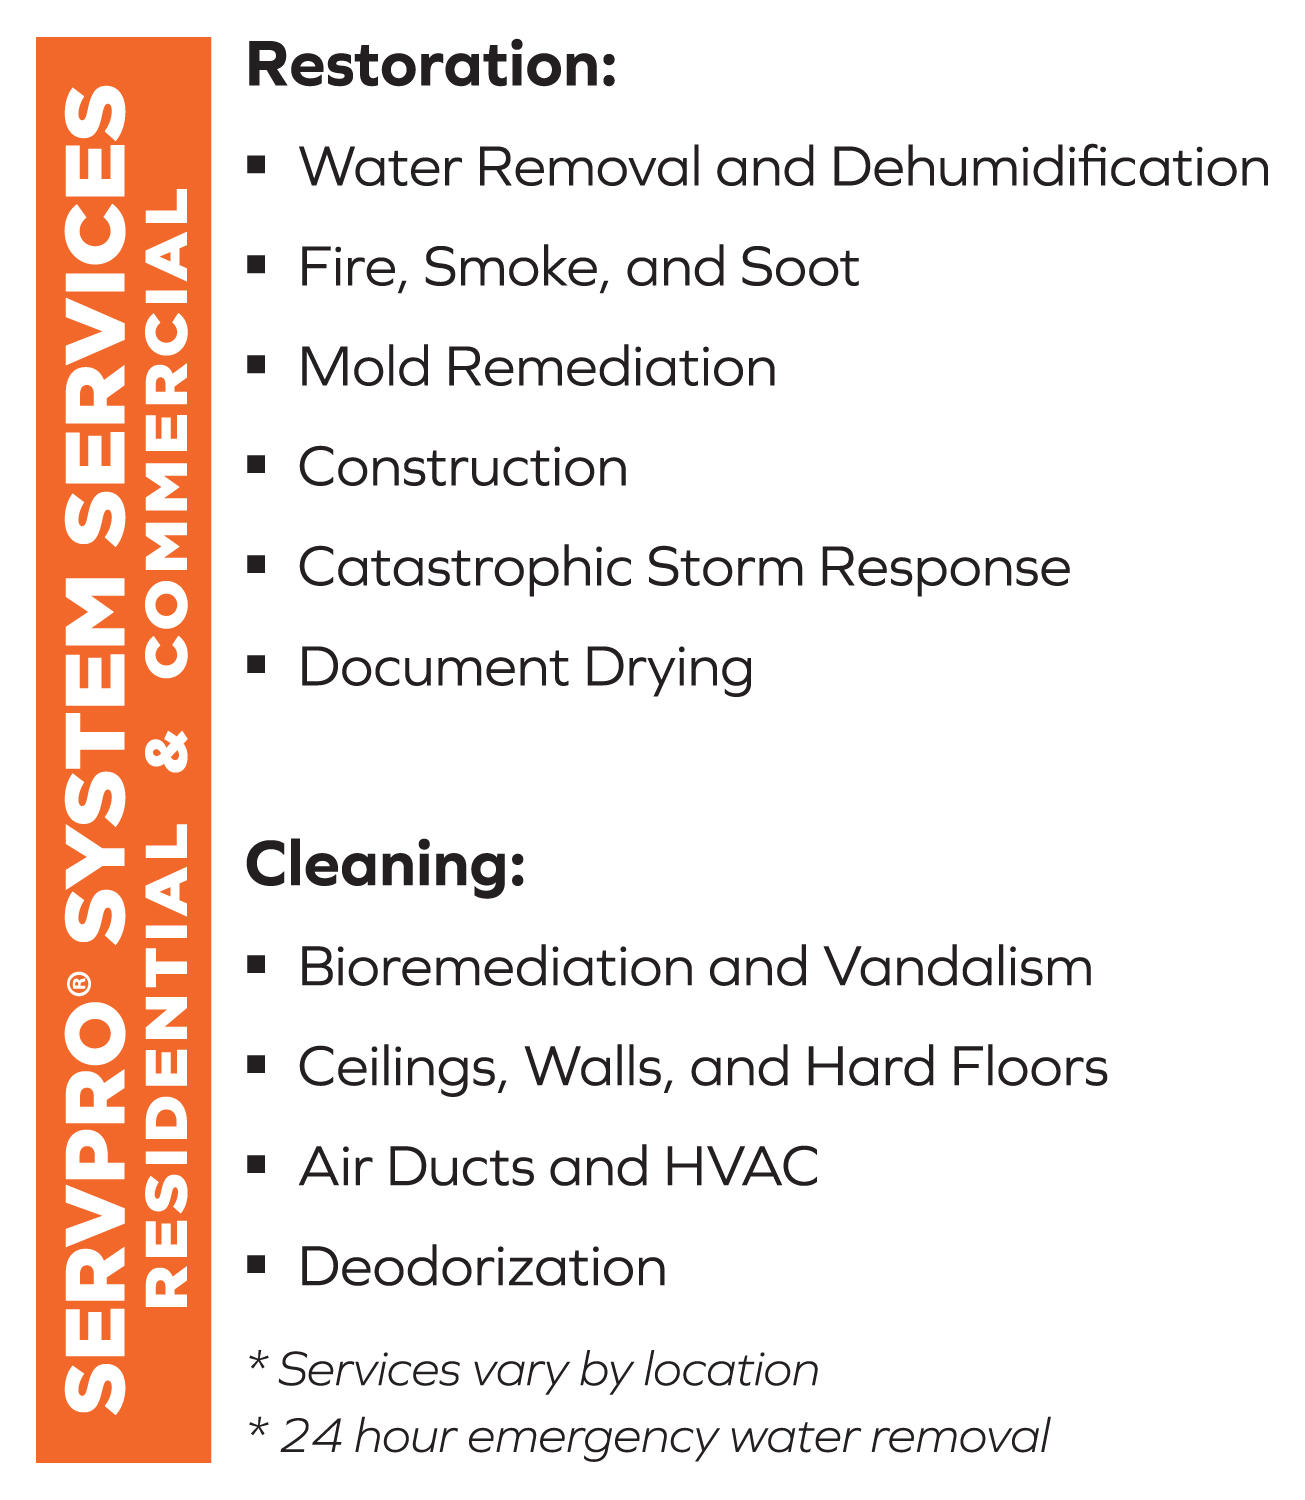 SERVPRO of Rapid City's list of services including: Water removal and dehumidification, fire, smoke, and soot mitigation, mold remediation, construction, document drying, biohazard and vandalism cleaning, ceiling, wall. and floor cleaning, air duct and HVAC cleaning